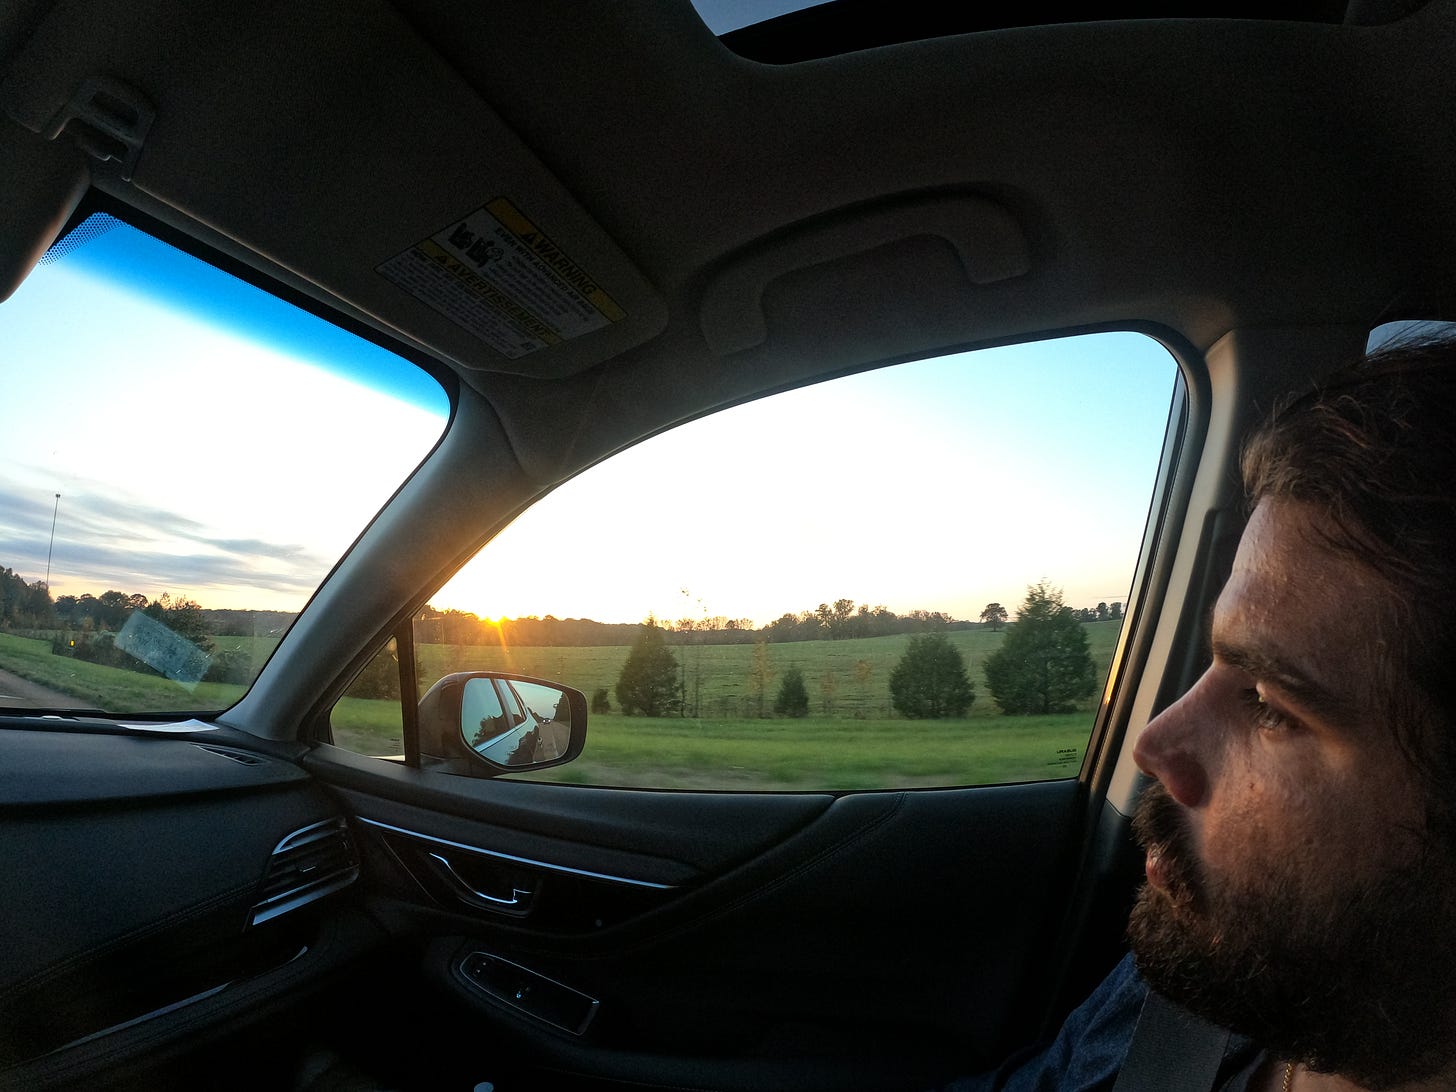 Anthony staring out the window as the sun sets over a green field in the Mississippi Delta